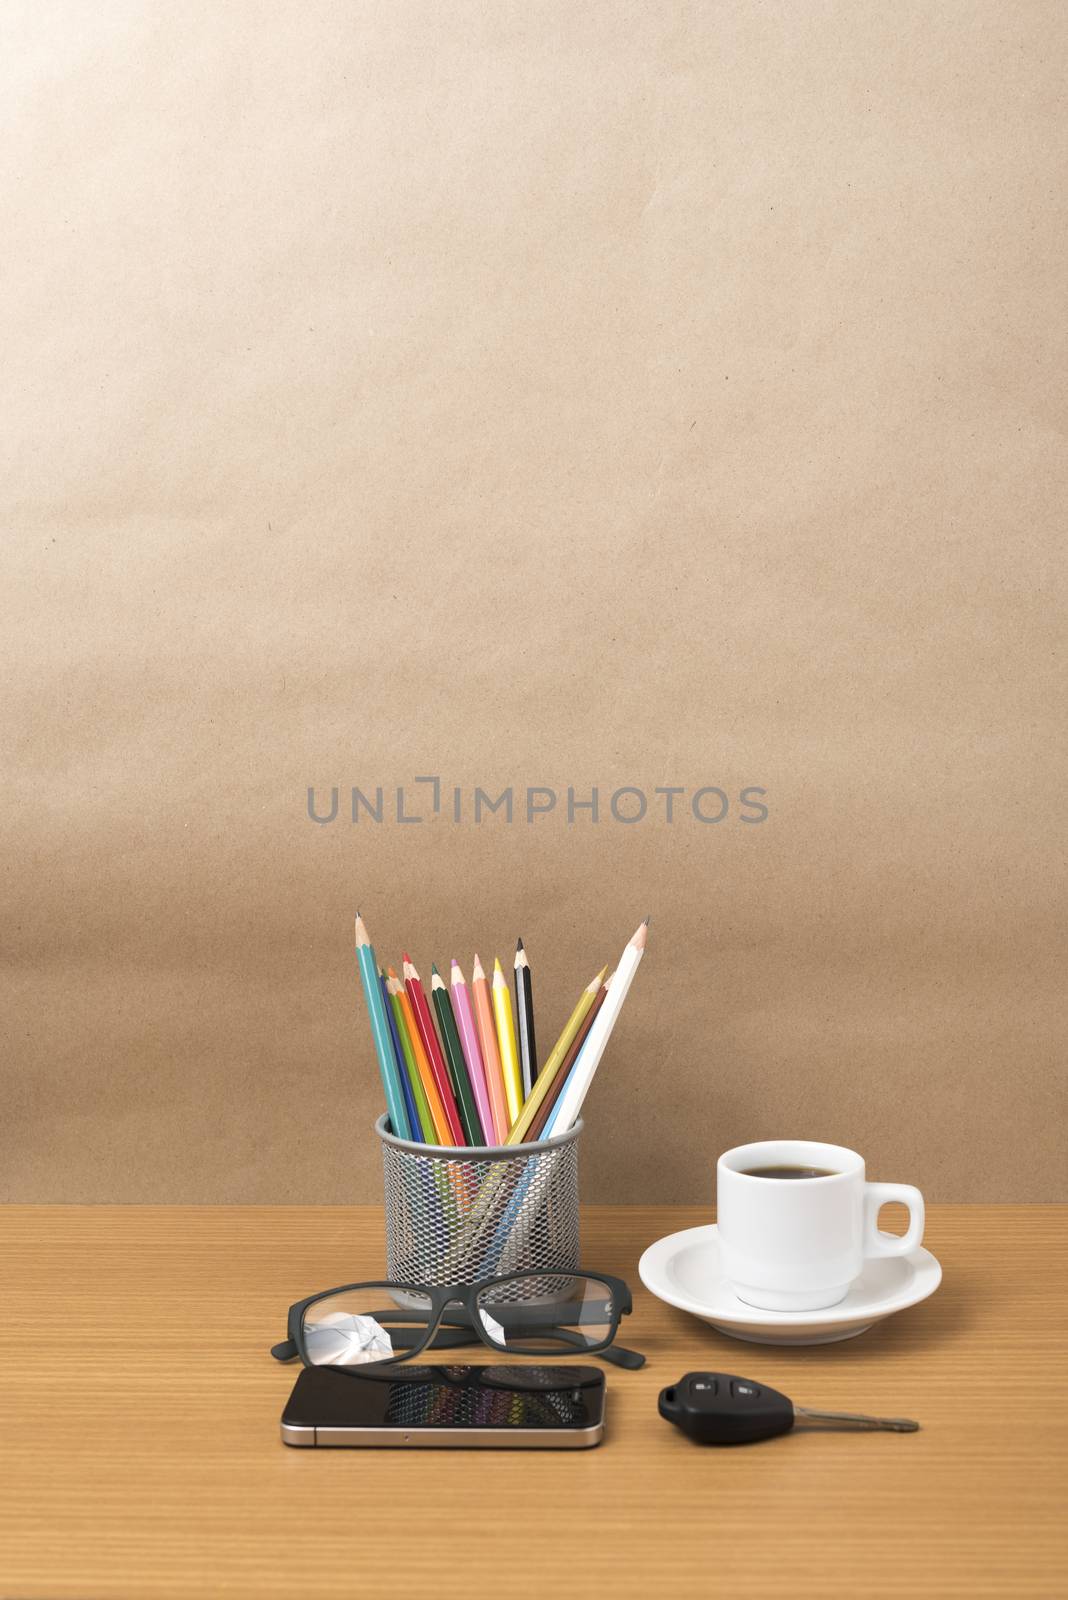 coffee,phone,eyeglasses,color pencil and car key by ammza12